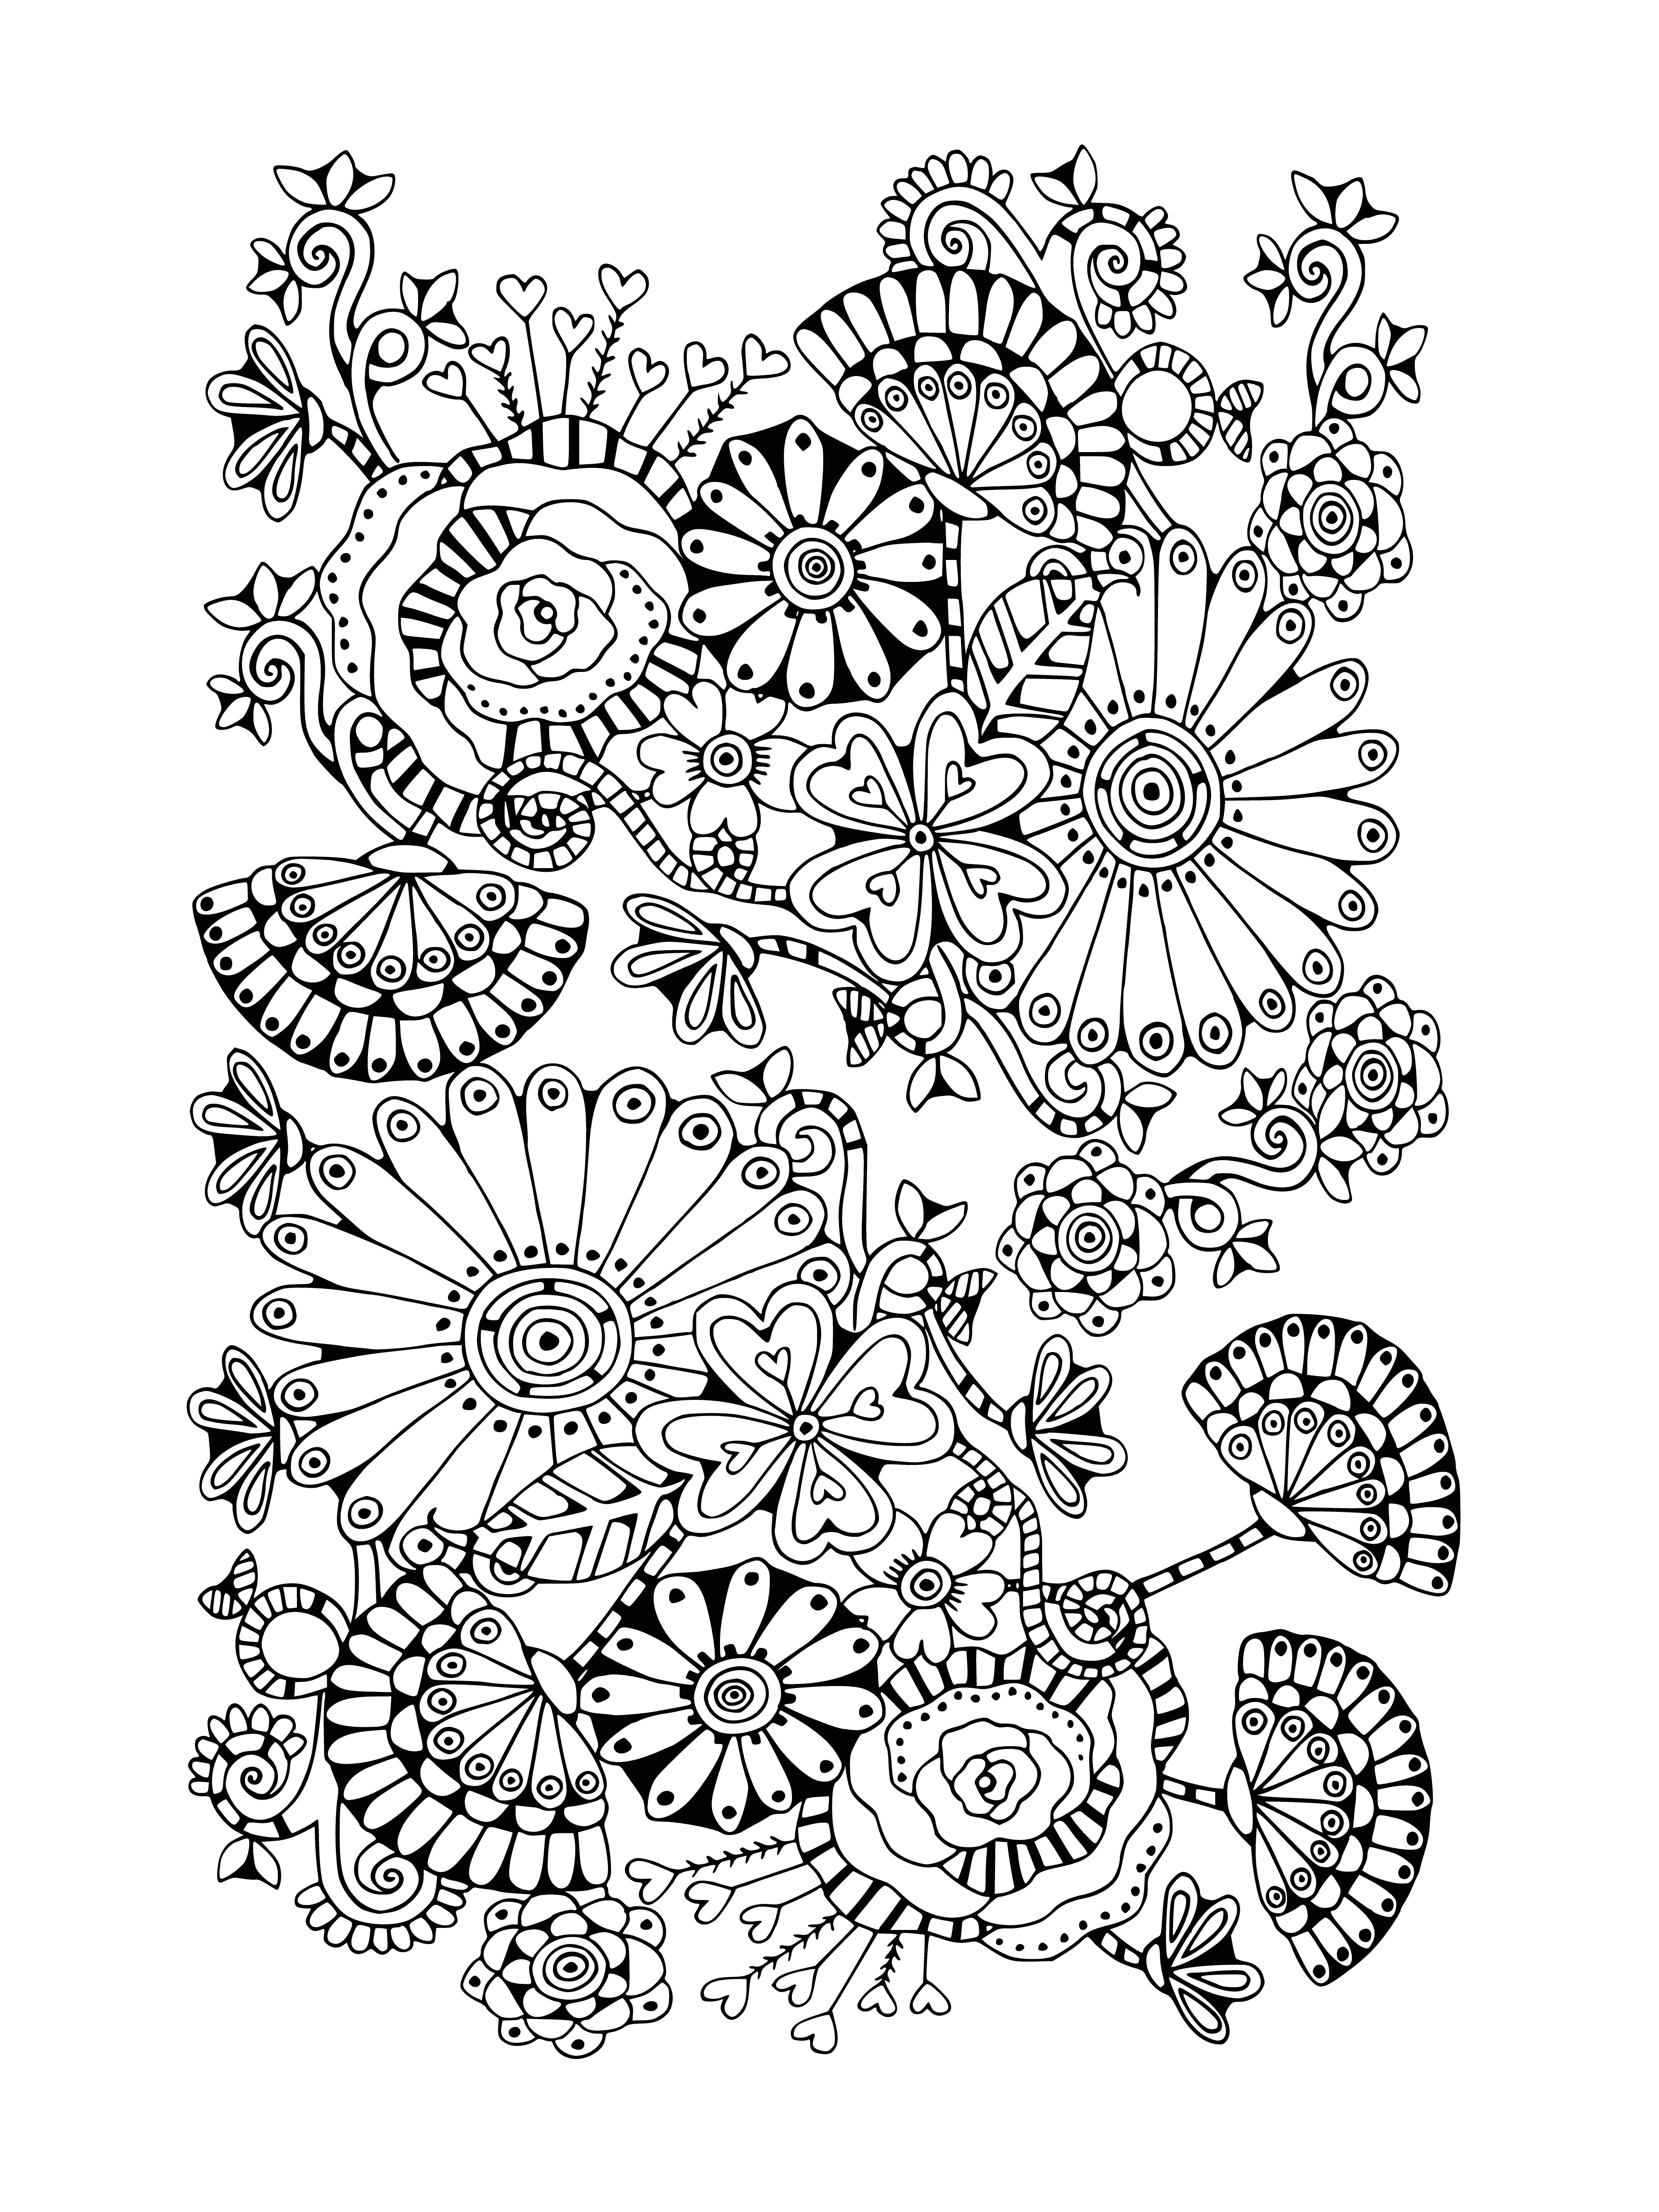 coloring page: A variety of flowers, from bouquets to vases, on a coloring page of light gray swirls against a mostly white background.